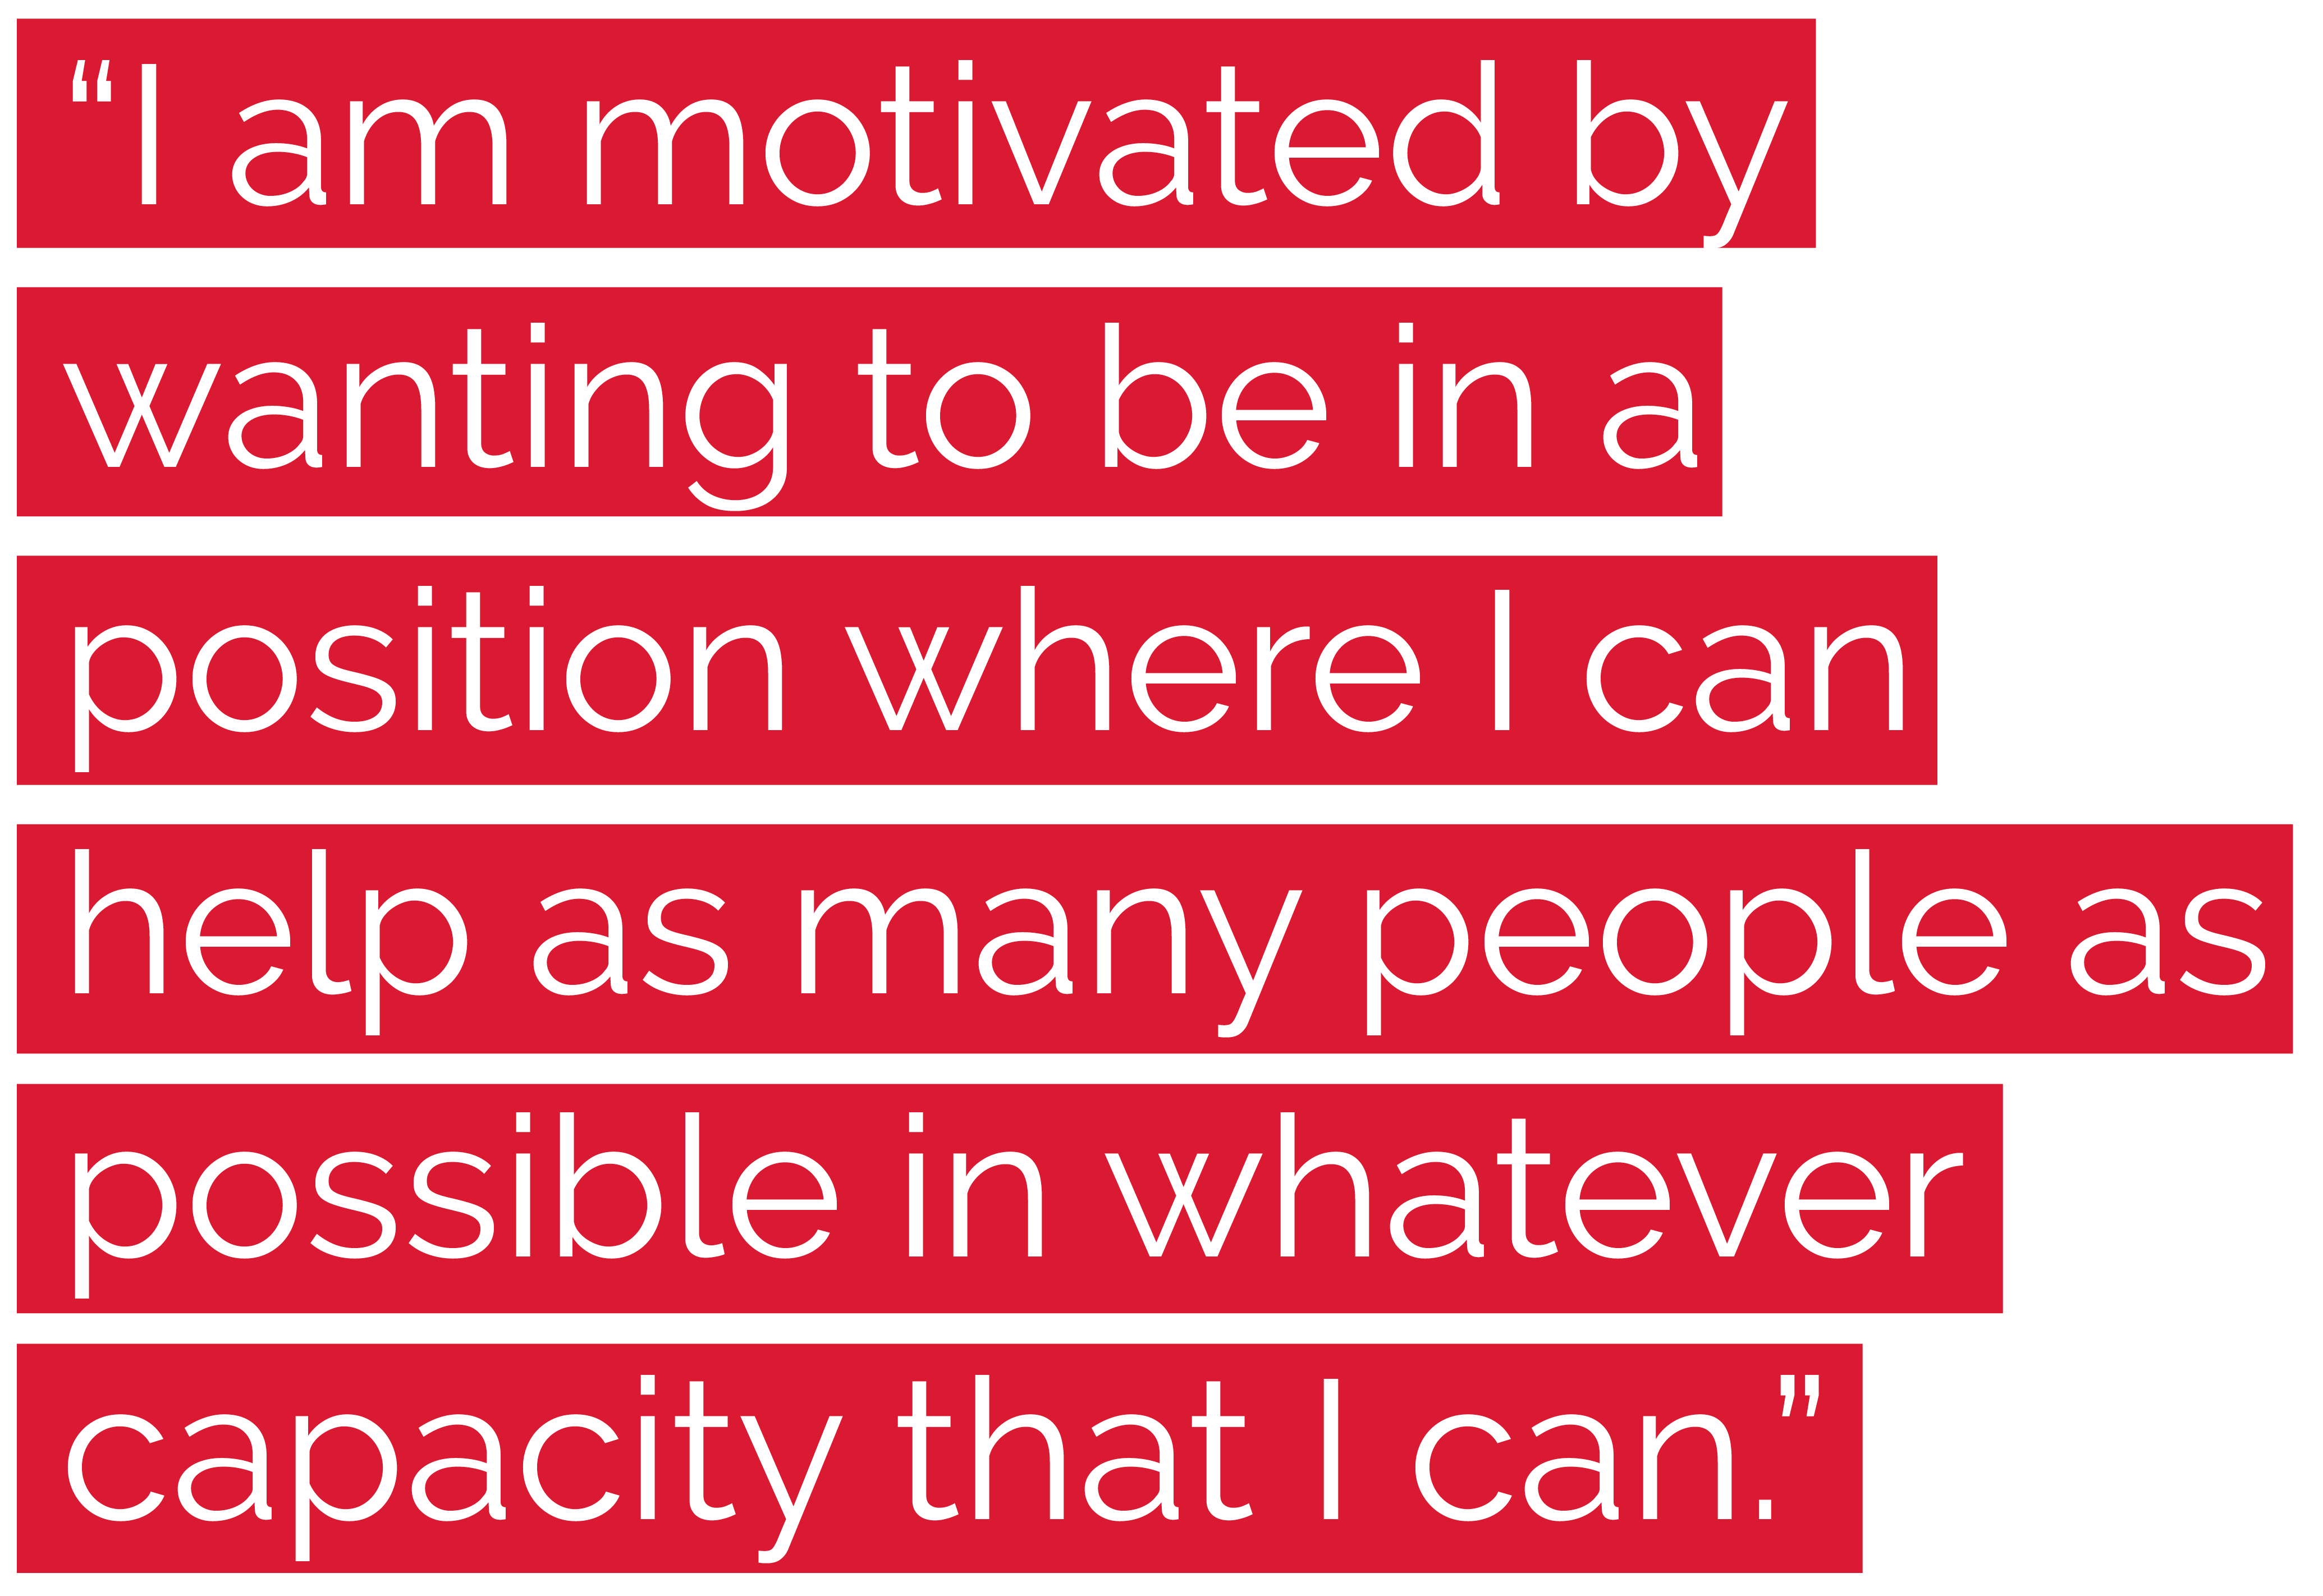 "I am motivated by wanting to be in a position where I can help as many people as possible in whatever capacity that I can."